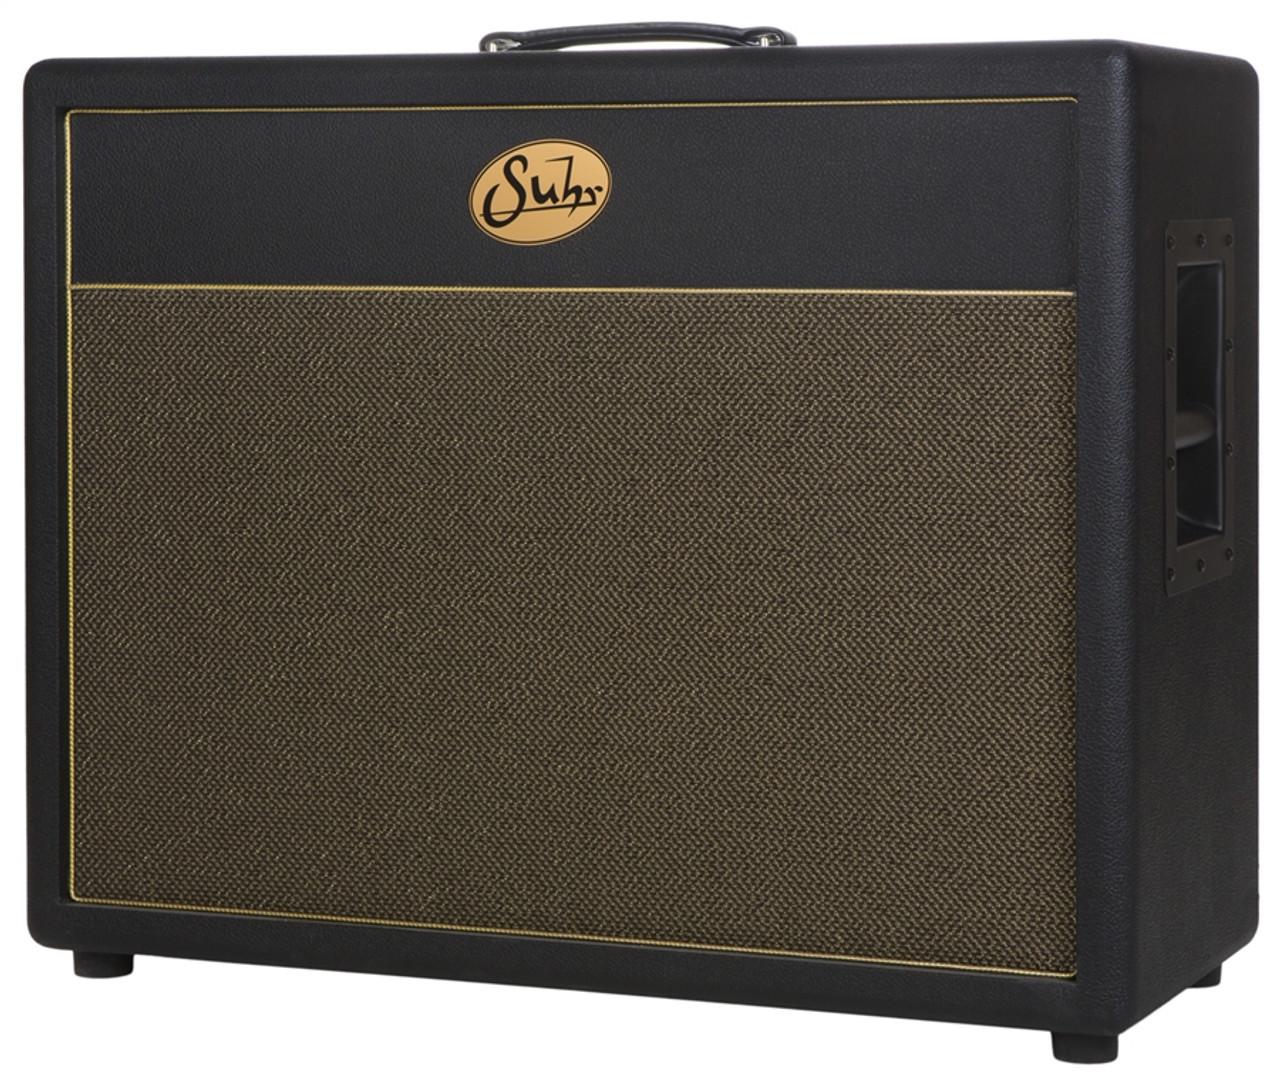 Suhr 2x12 Deep Speaker Cabinet in Black with Gold Grille and Celestion Vintage 30 Speakers